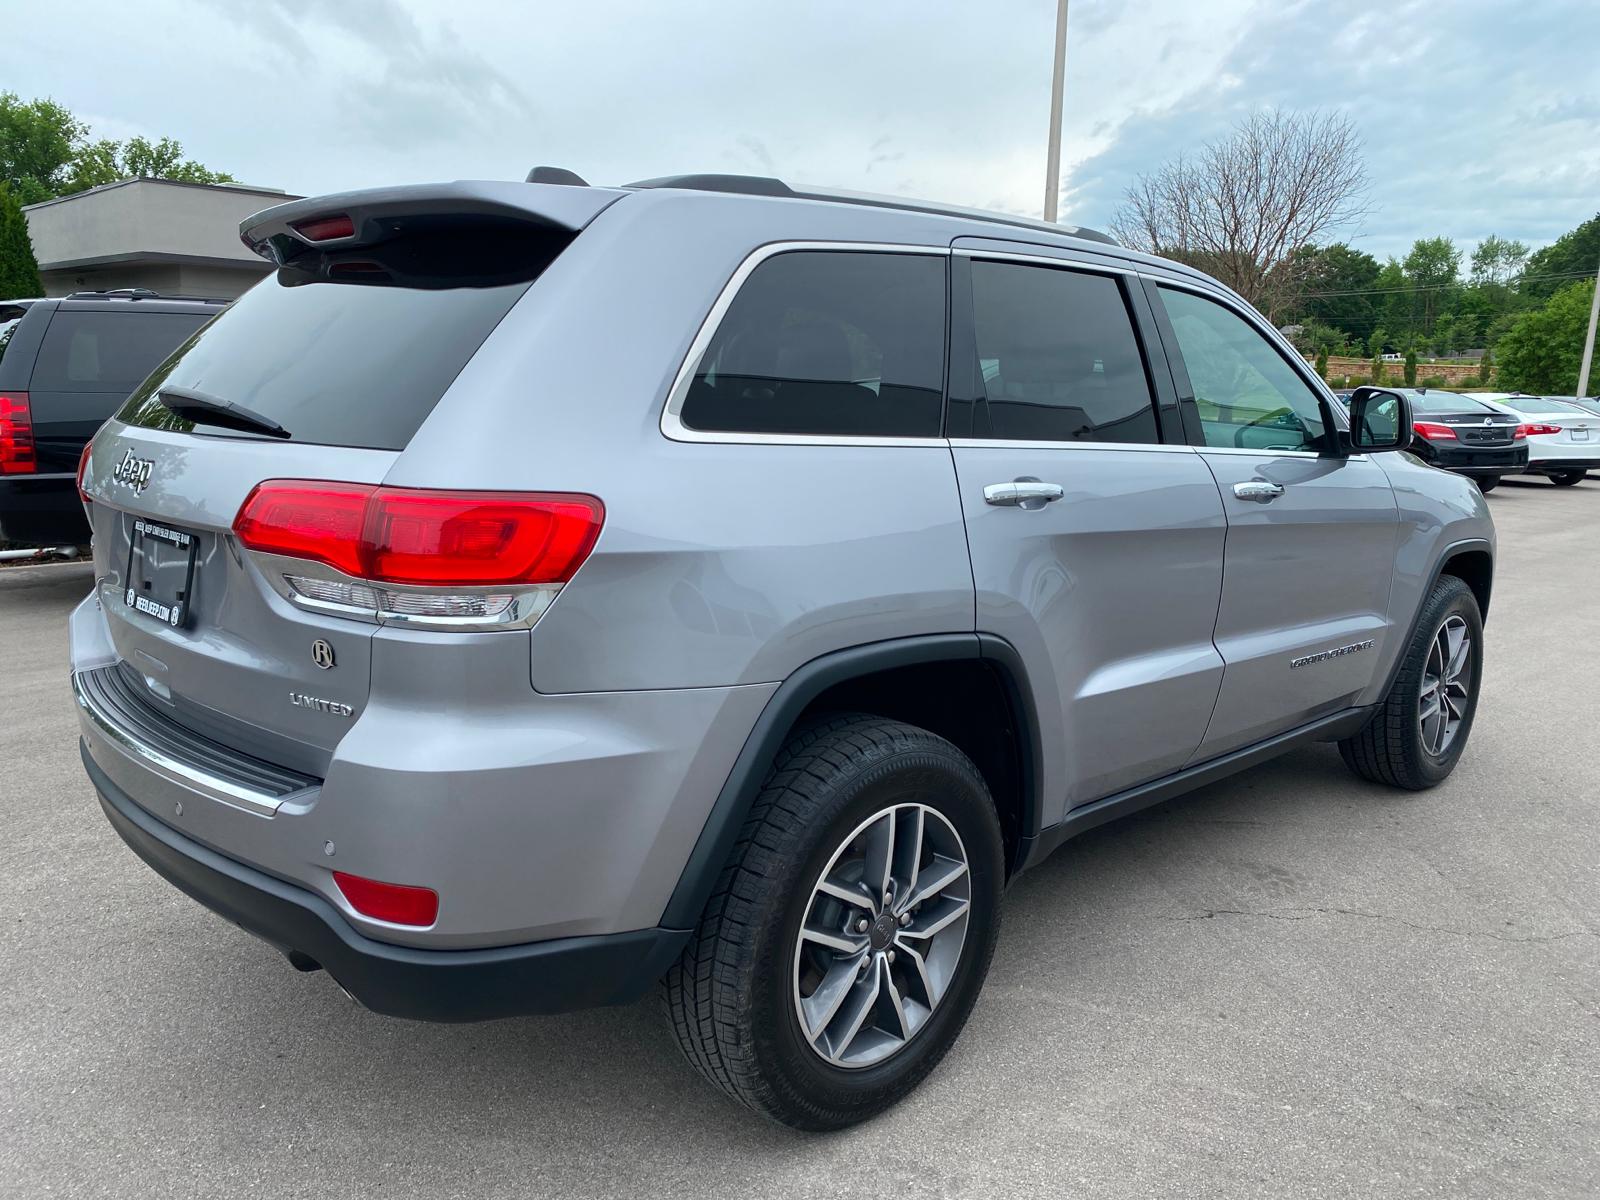 Certified PreOwned 2019 Jeep Grand Cherokee Limited 4×4